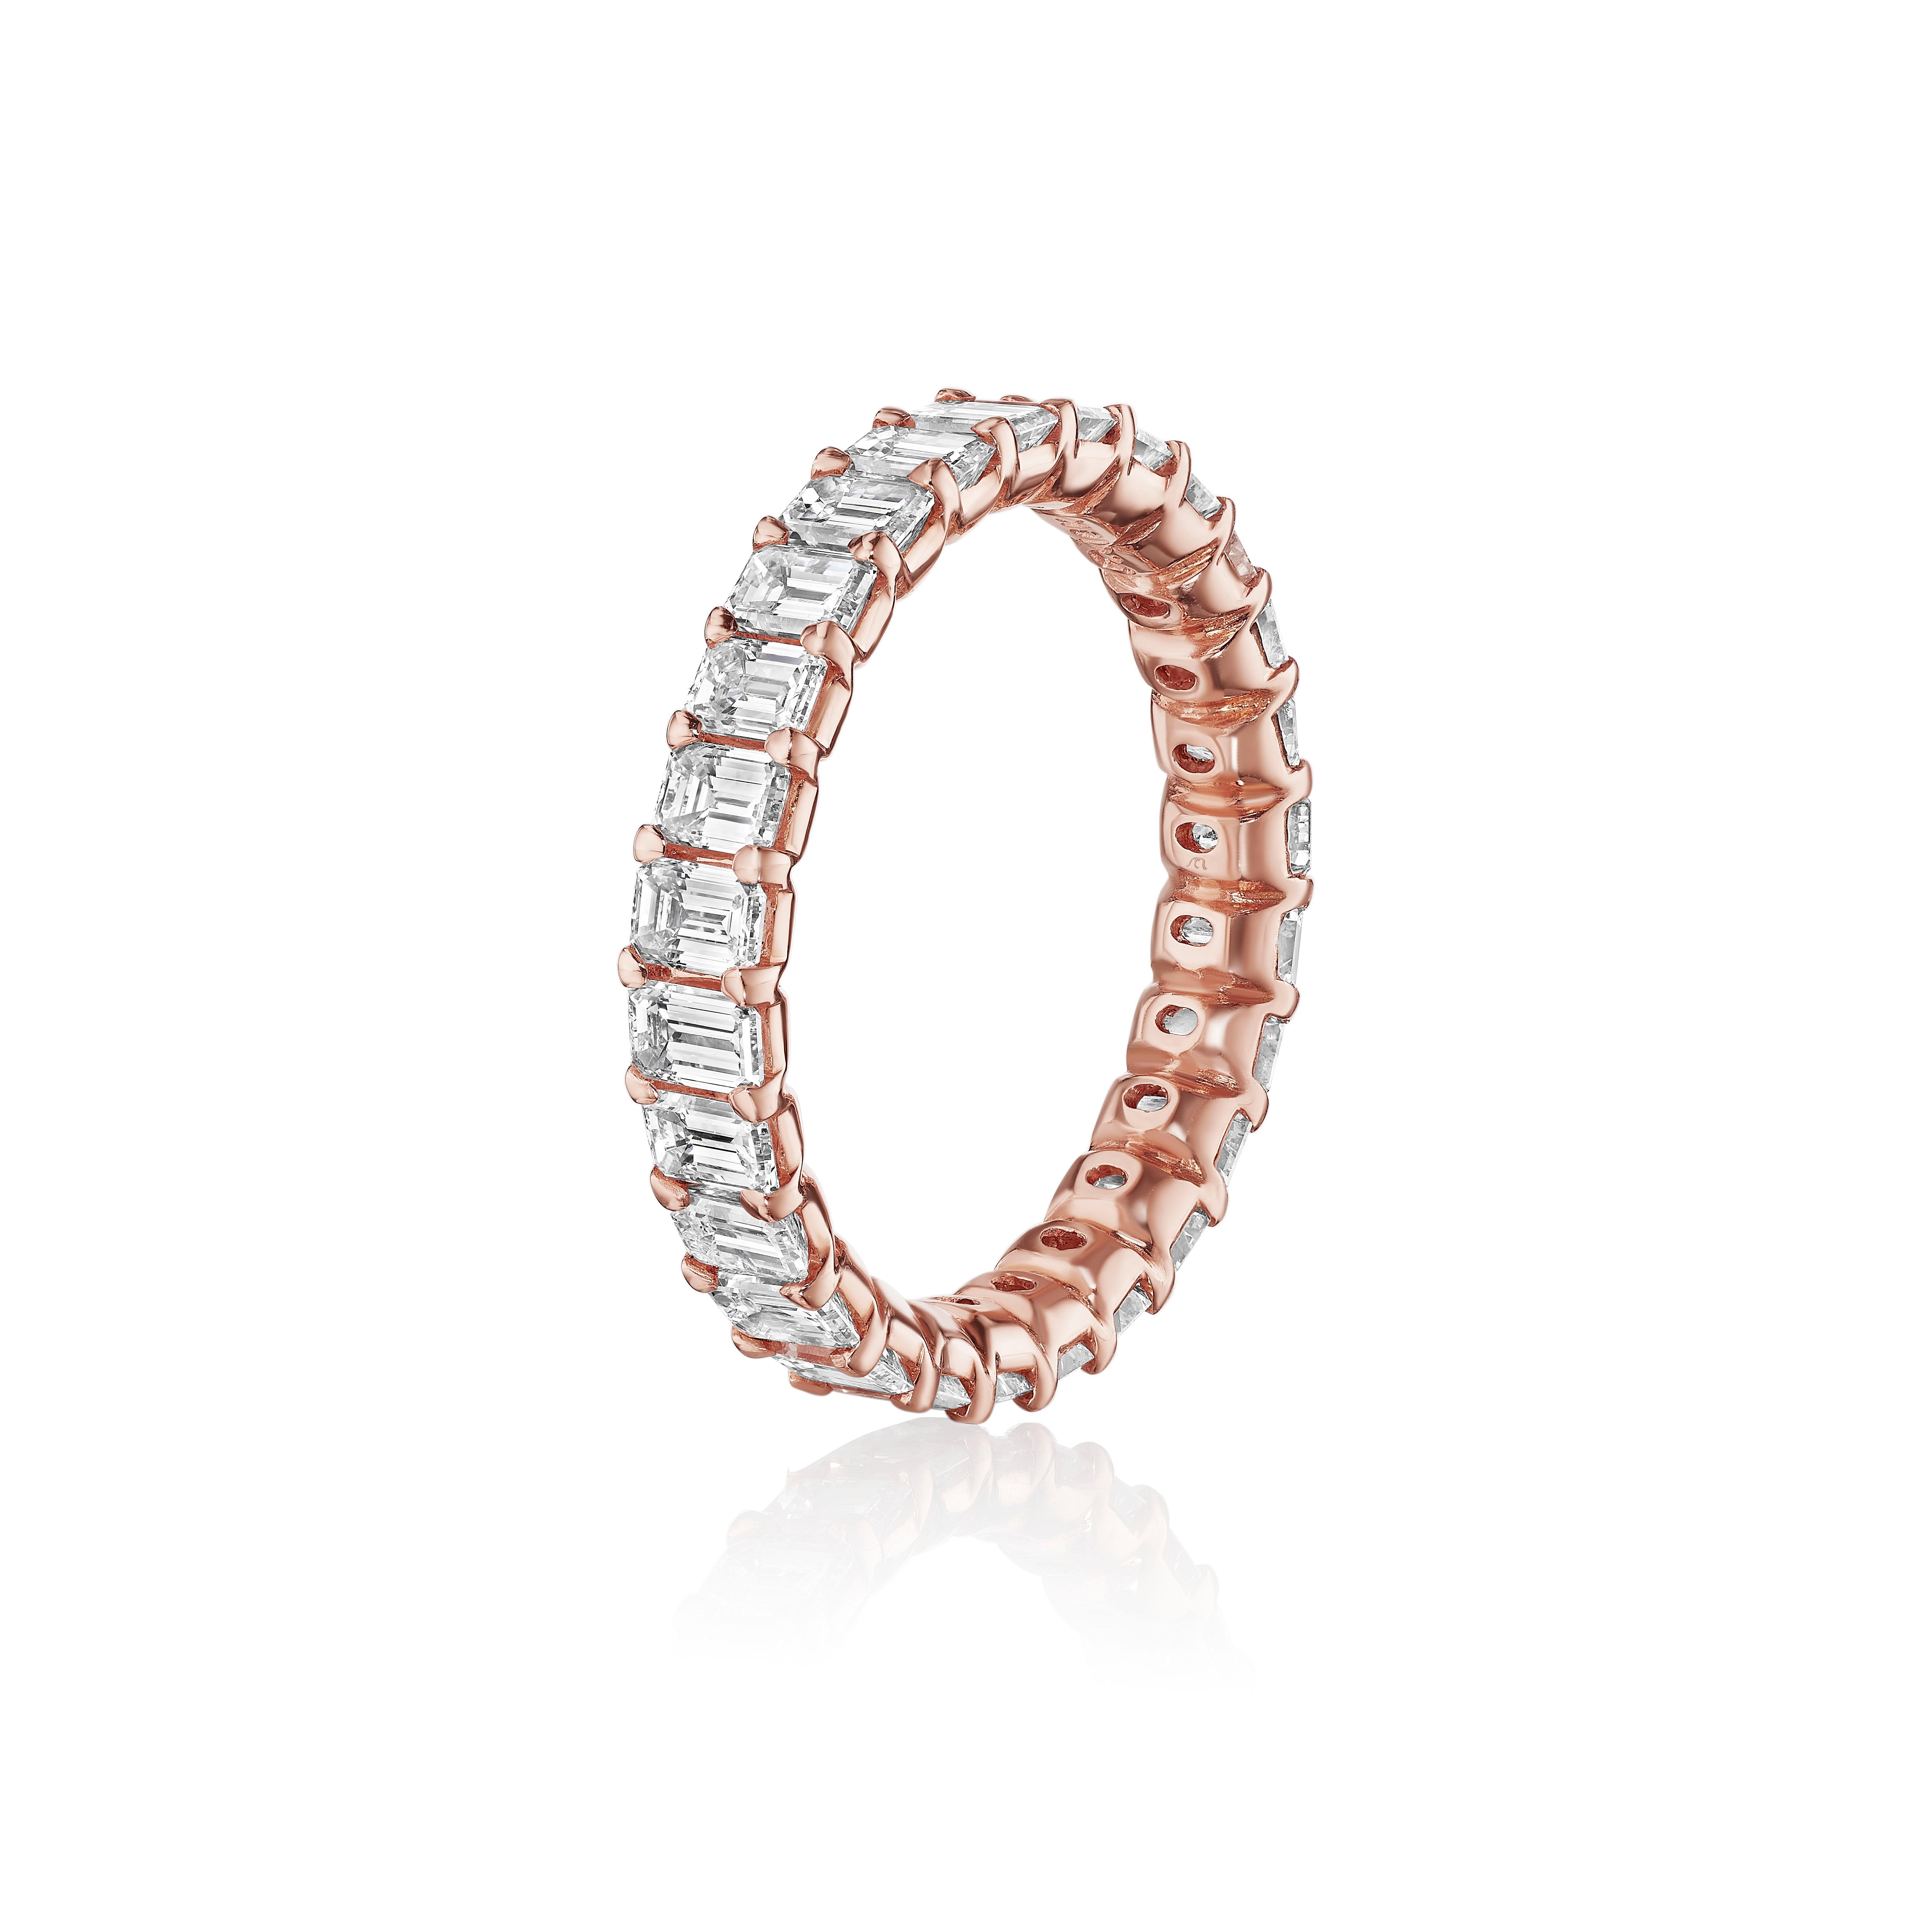 2.75ct Diamond Emerald Cut Eternity Band in 18KT Rose Gold In New Condition For Sale In New York, NY